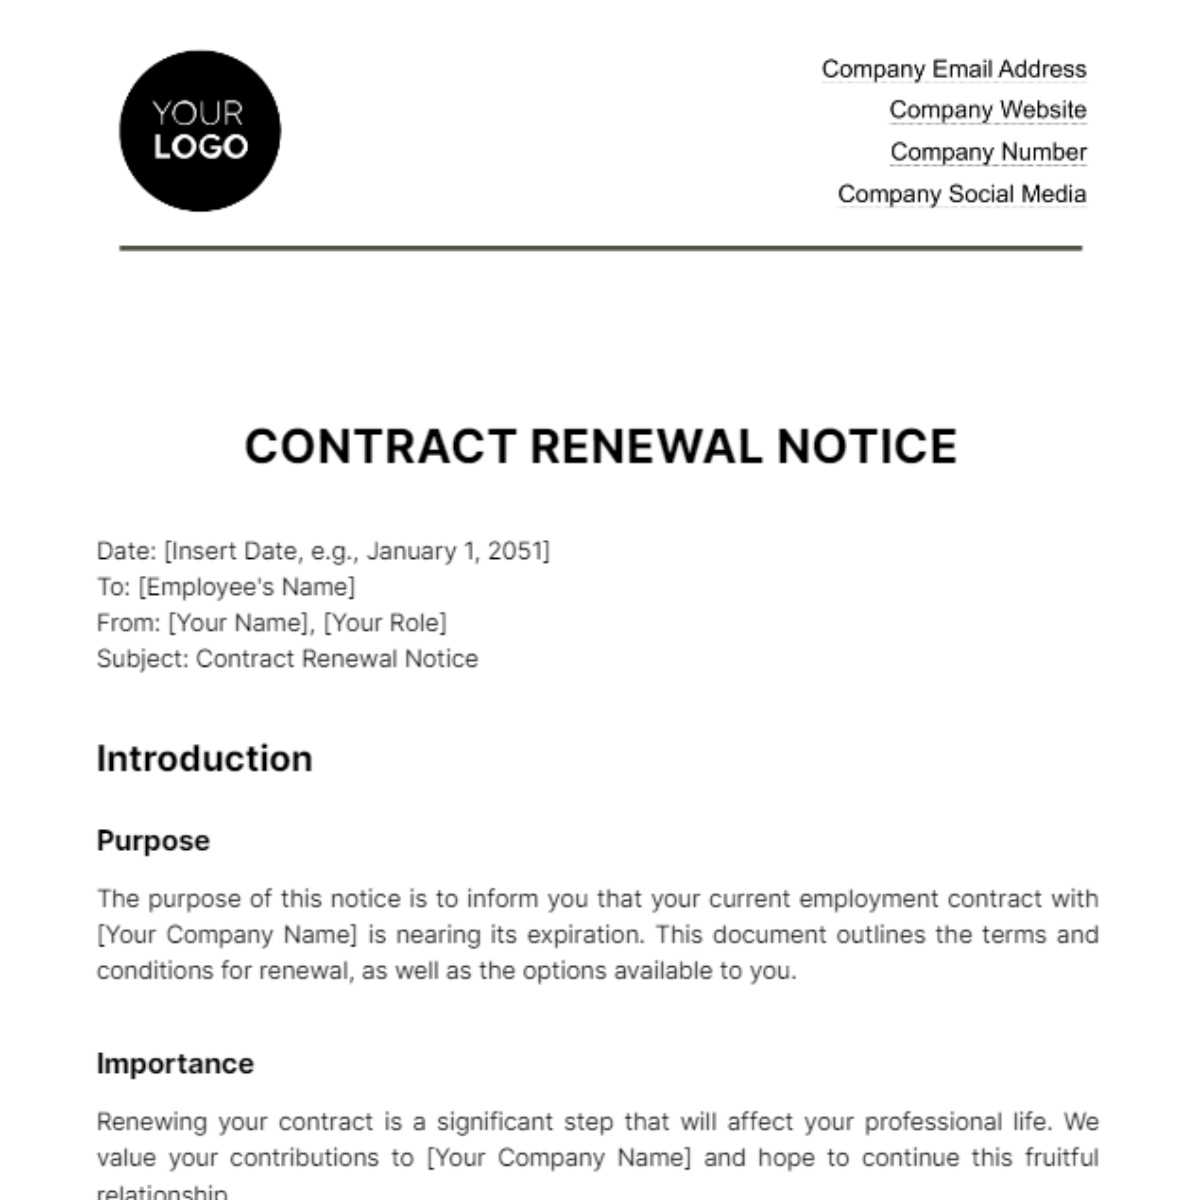 Free Contract Renewal Notice HR Template